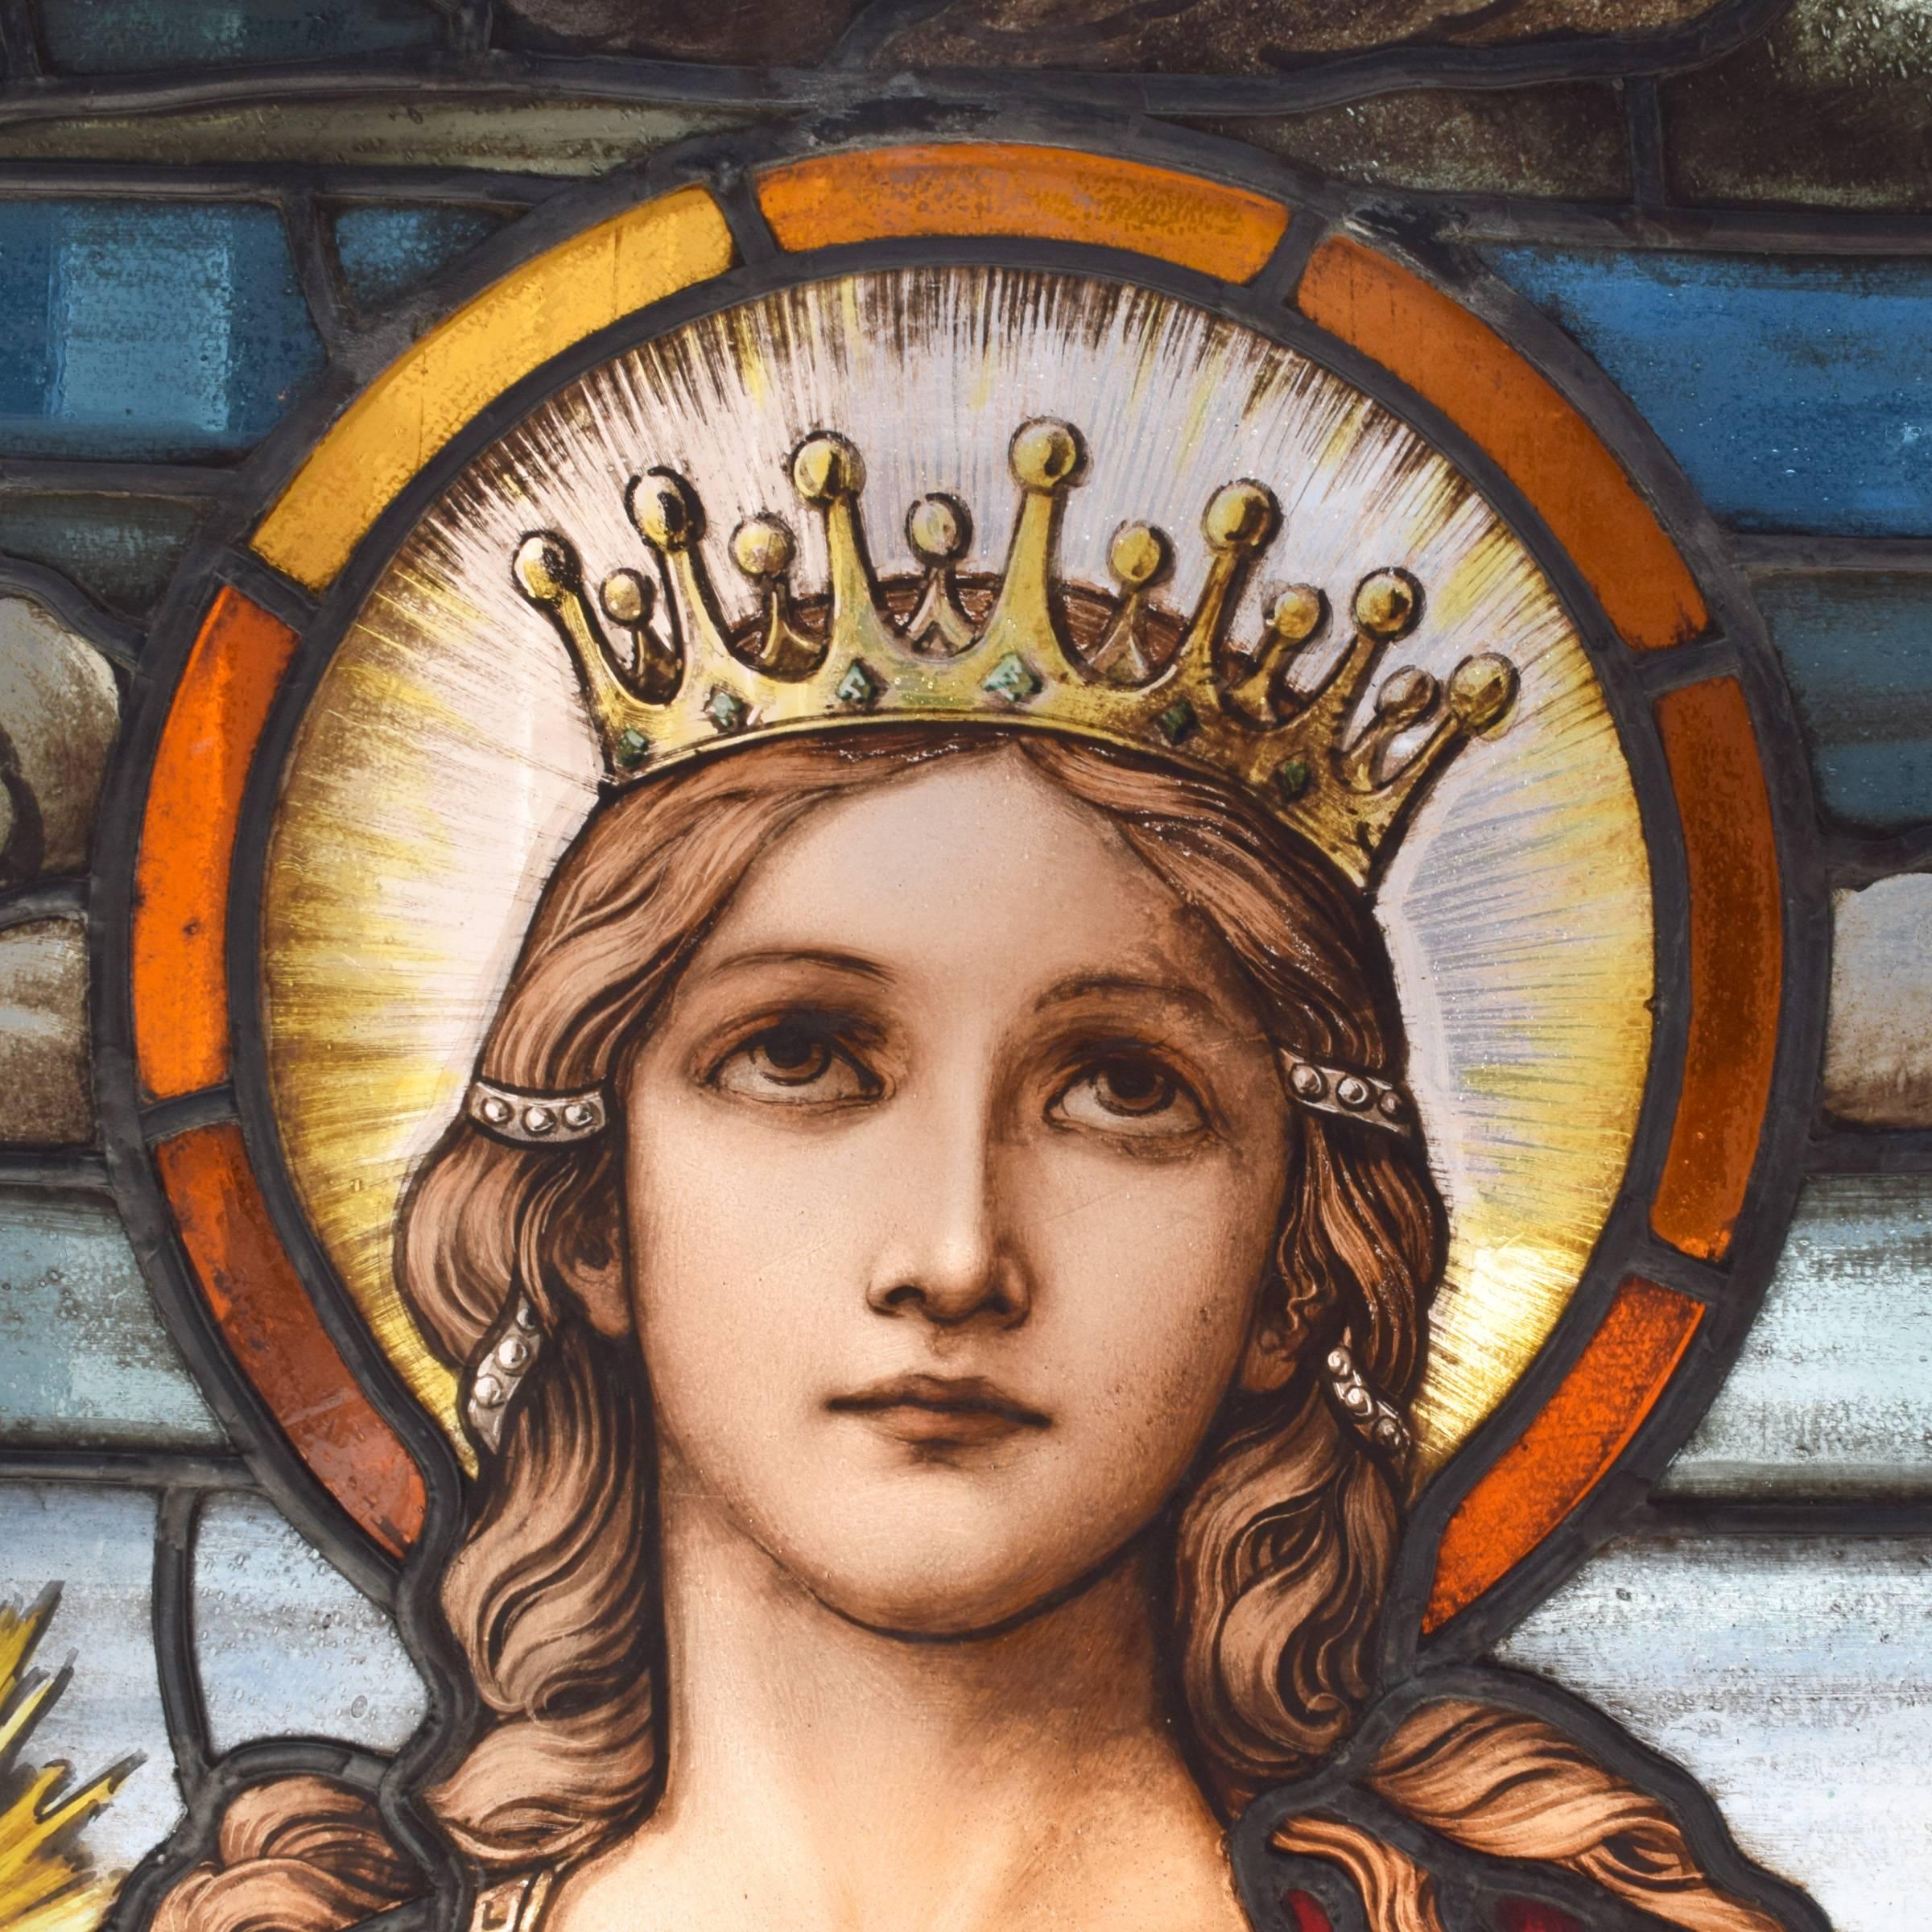 A fantastic art glass scenic arch top window from an American church. The window depicts St. Barbara, the patron saint of artillerymen, standing under a stormy sky with a tower in the distance. She’s wearing a crown and holding a sword and palm